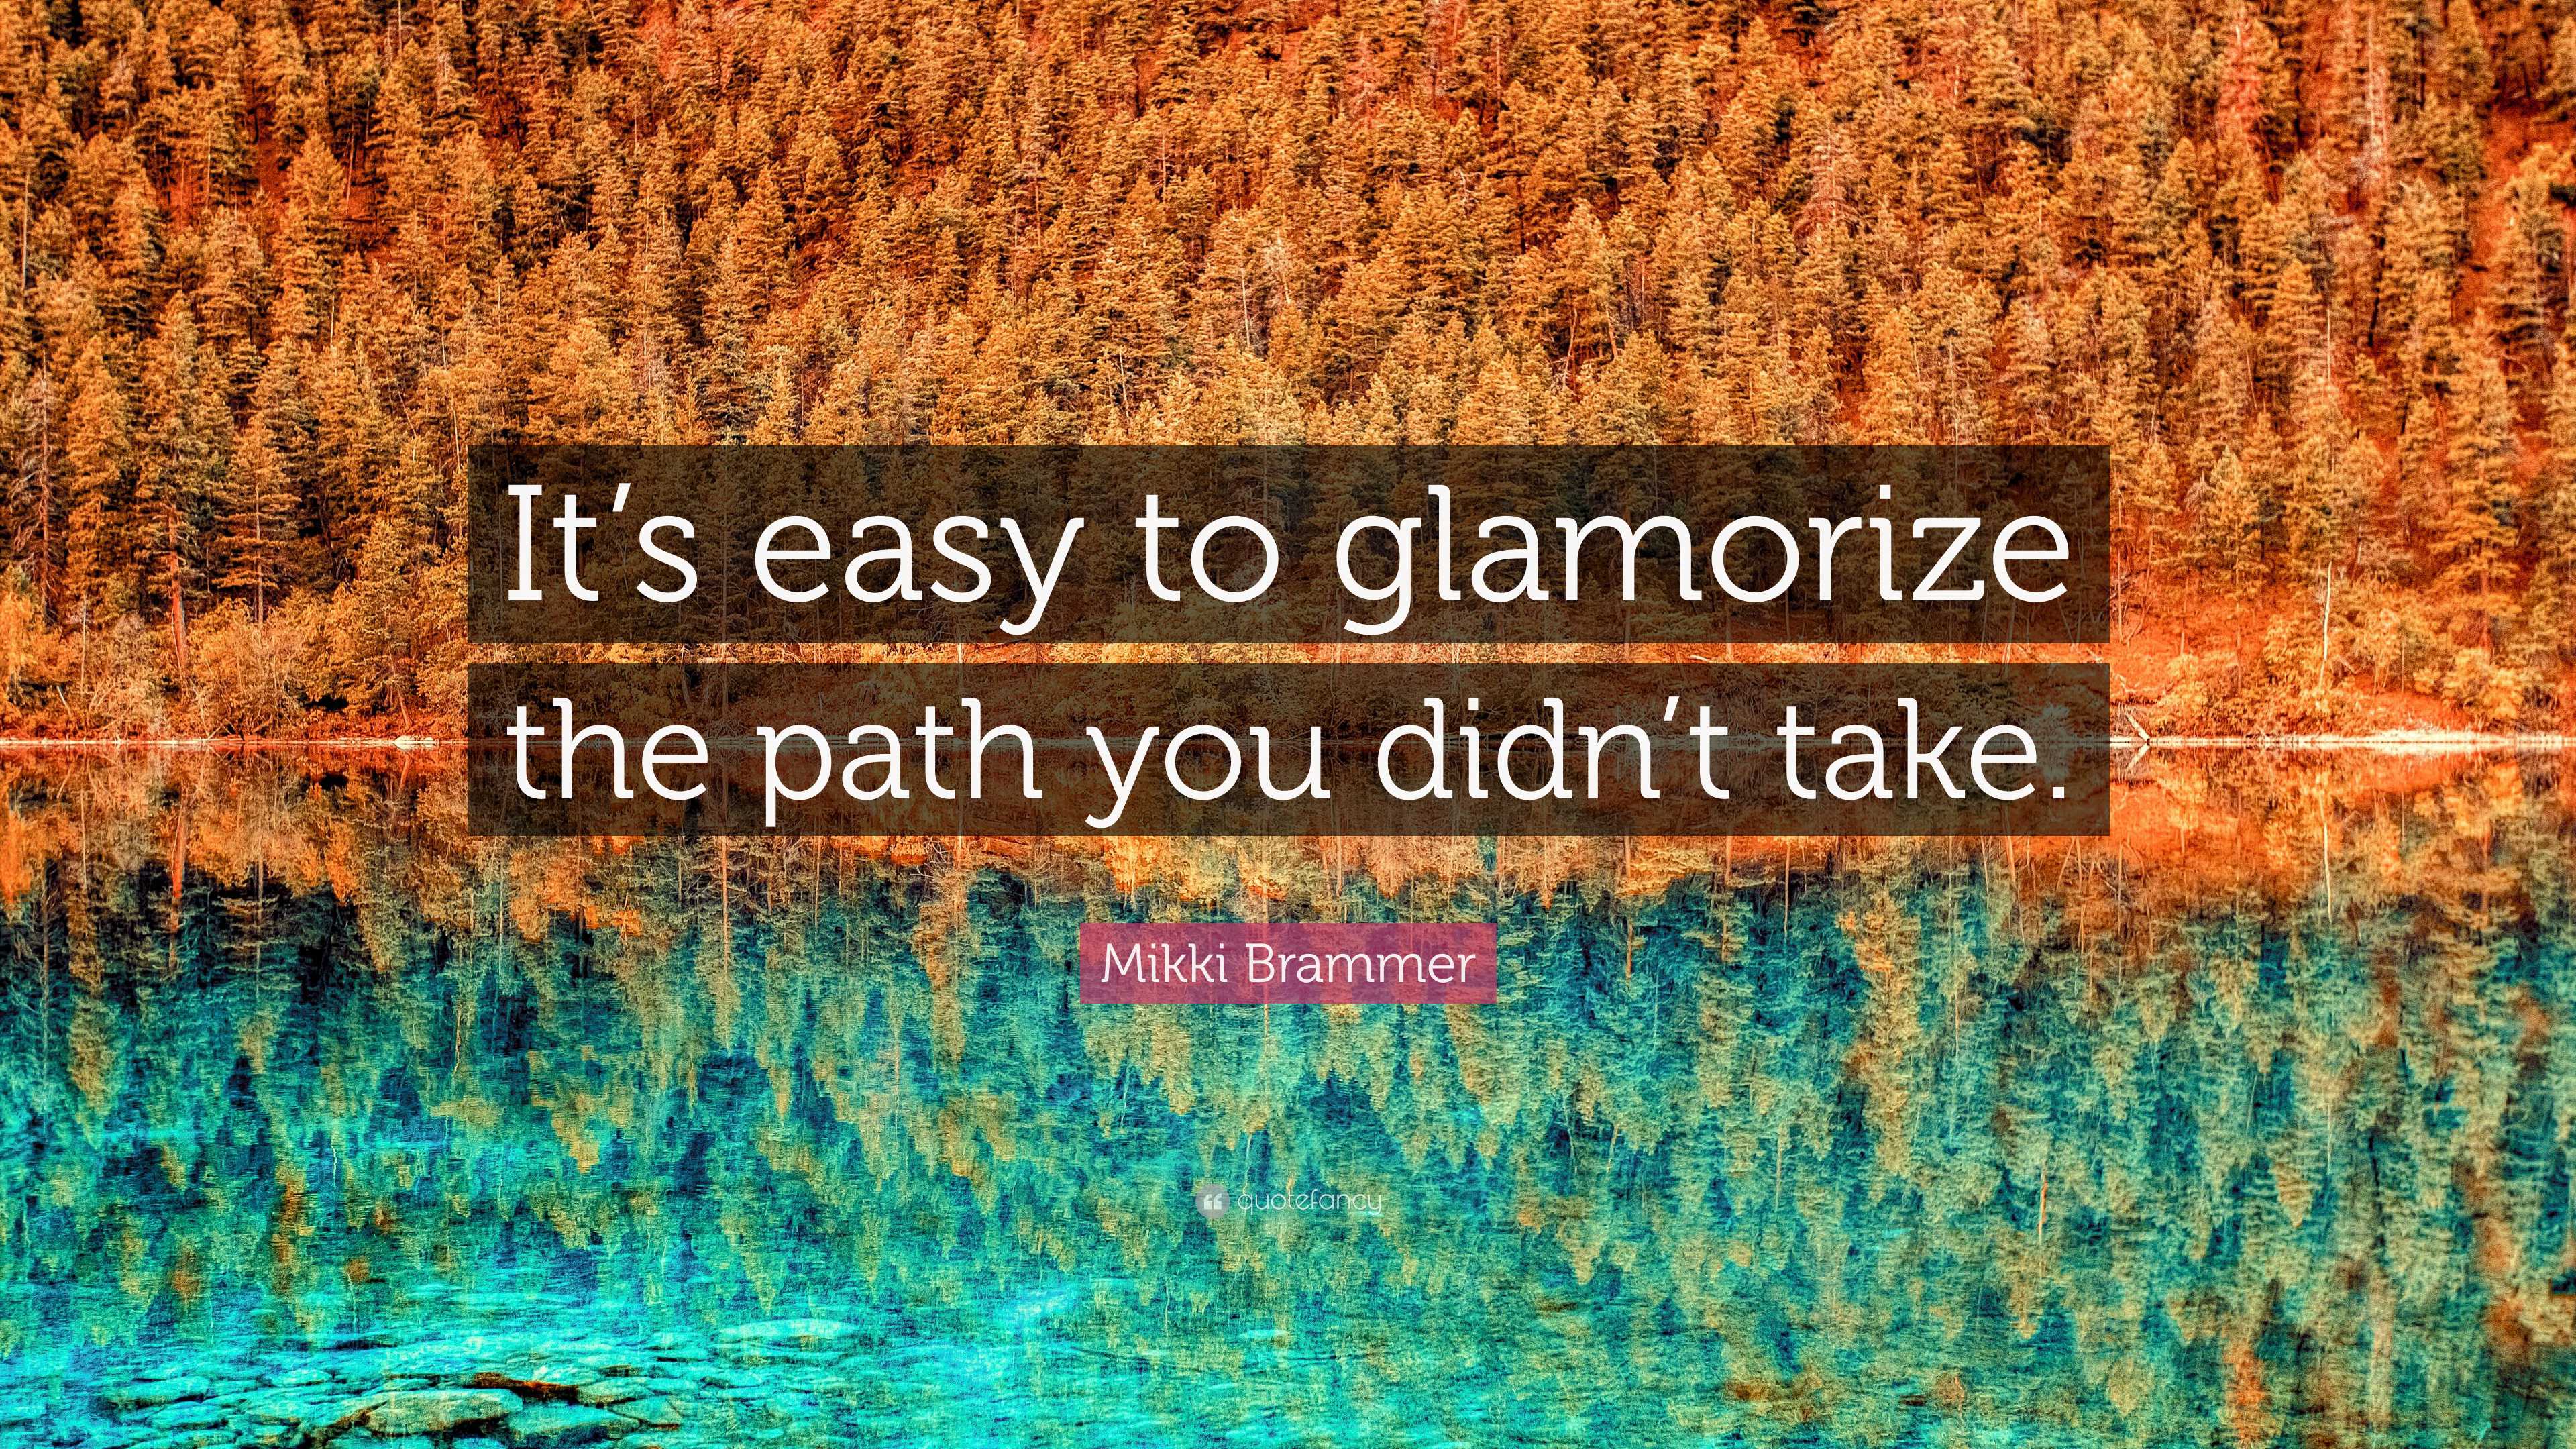 Mikki Brammer Quote: “It's easy to glamorize the path you didn't take.”